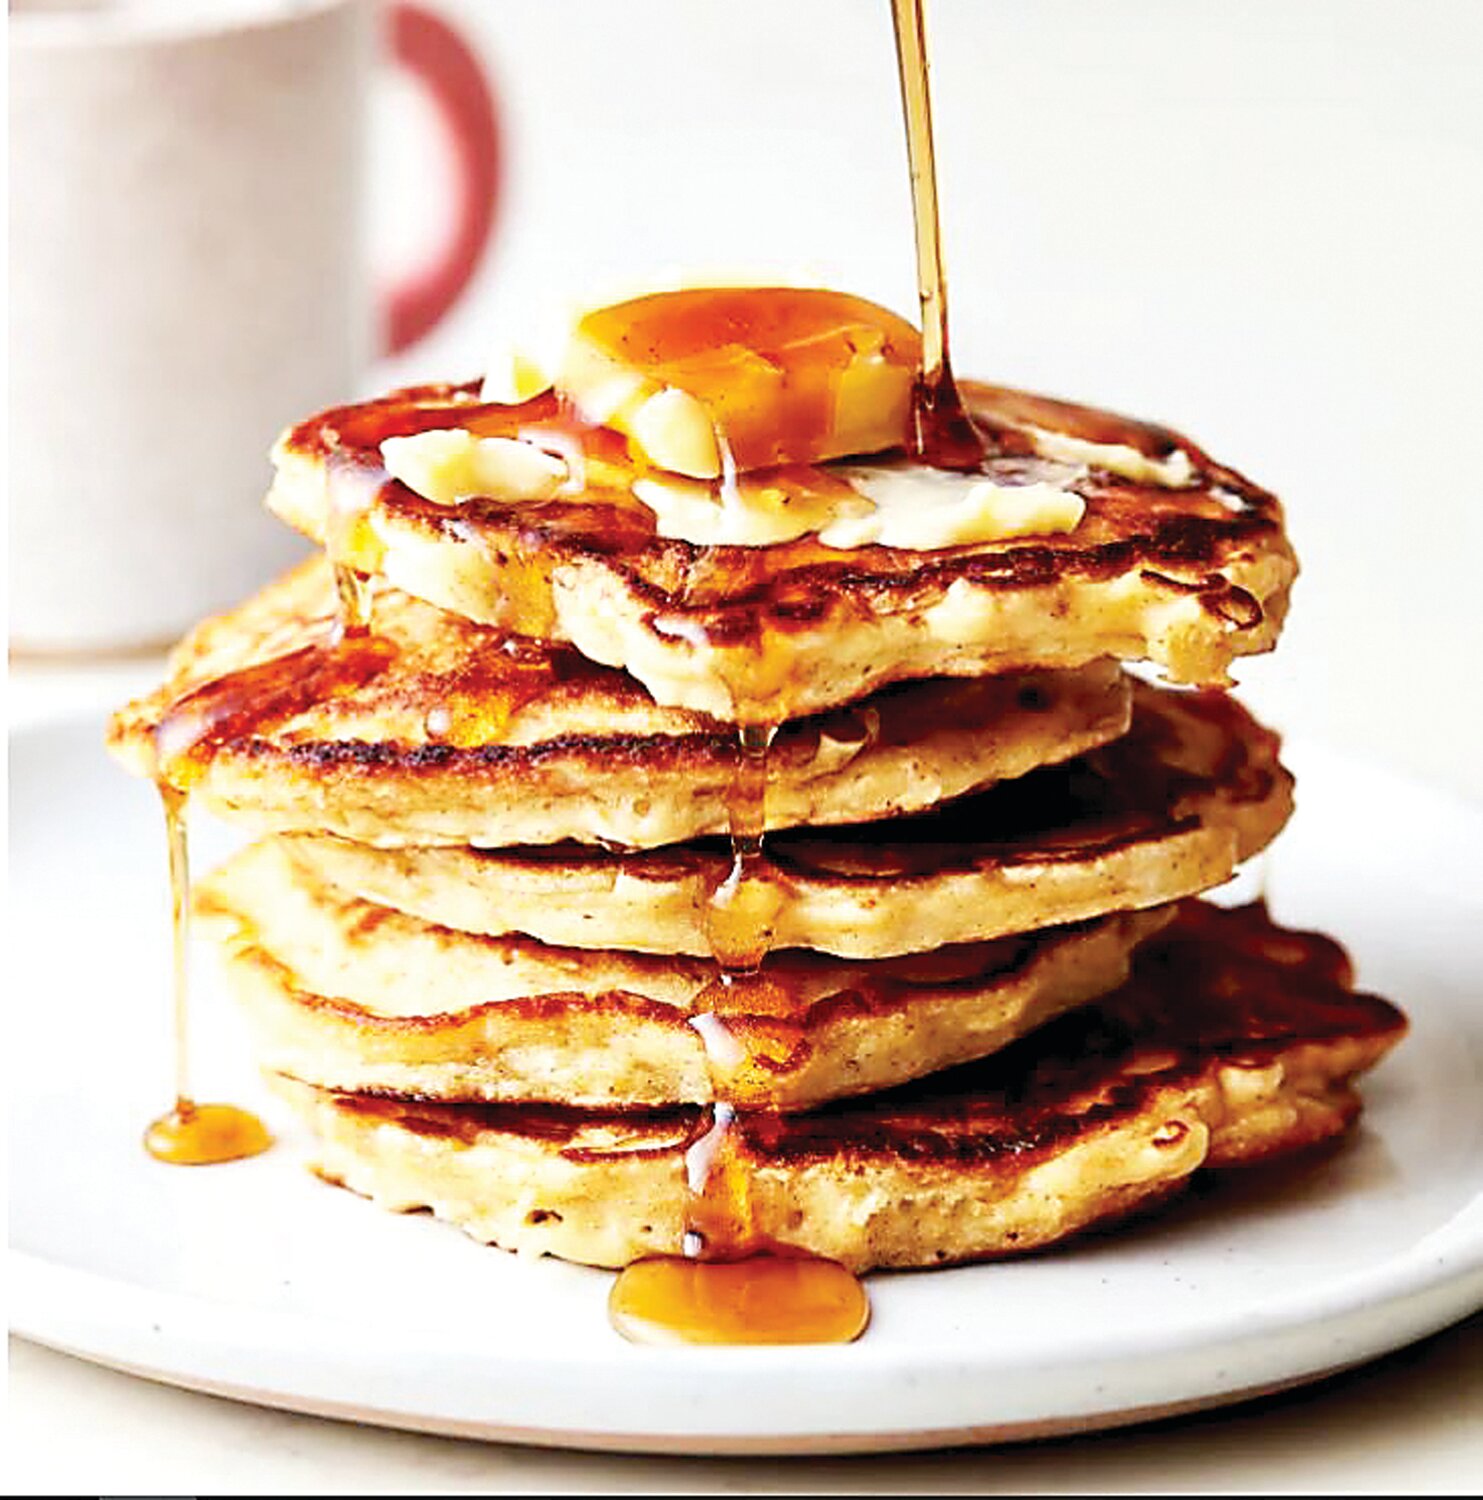 Oatmeal pancakes give you the pleasure of sweet pancakes along with the hearty, filling and nutritious benefits of oatmeal.